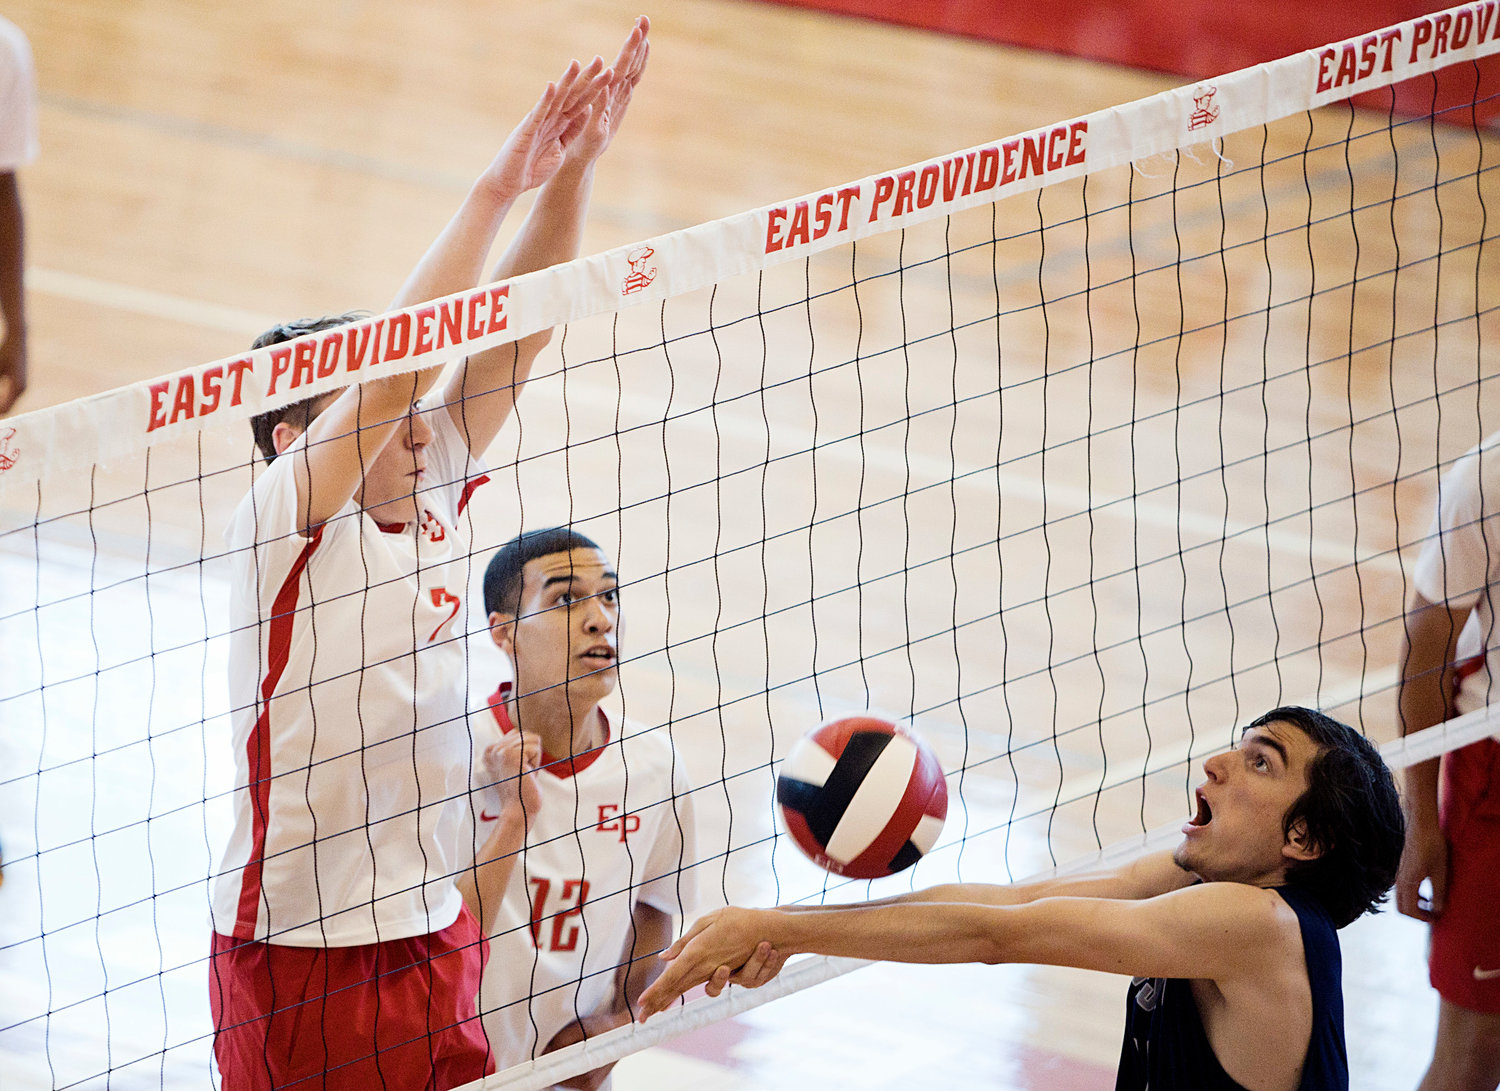 East Providence High School’s D.J. Lepine and Grant Wosencroft anticipate the ball while competing against Westerly in the Division II boys' volleyball semifinals, Wednesday, June 8.